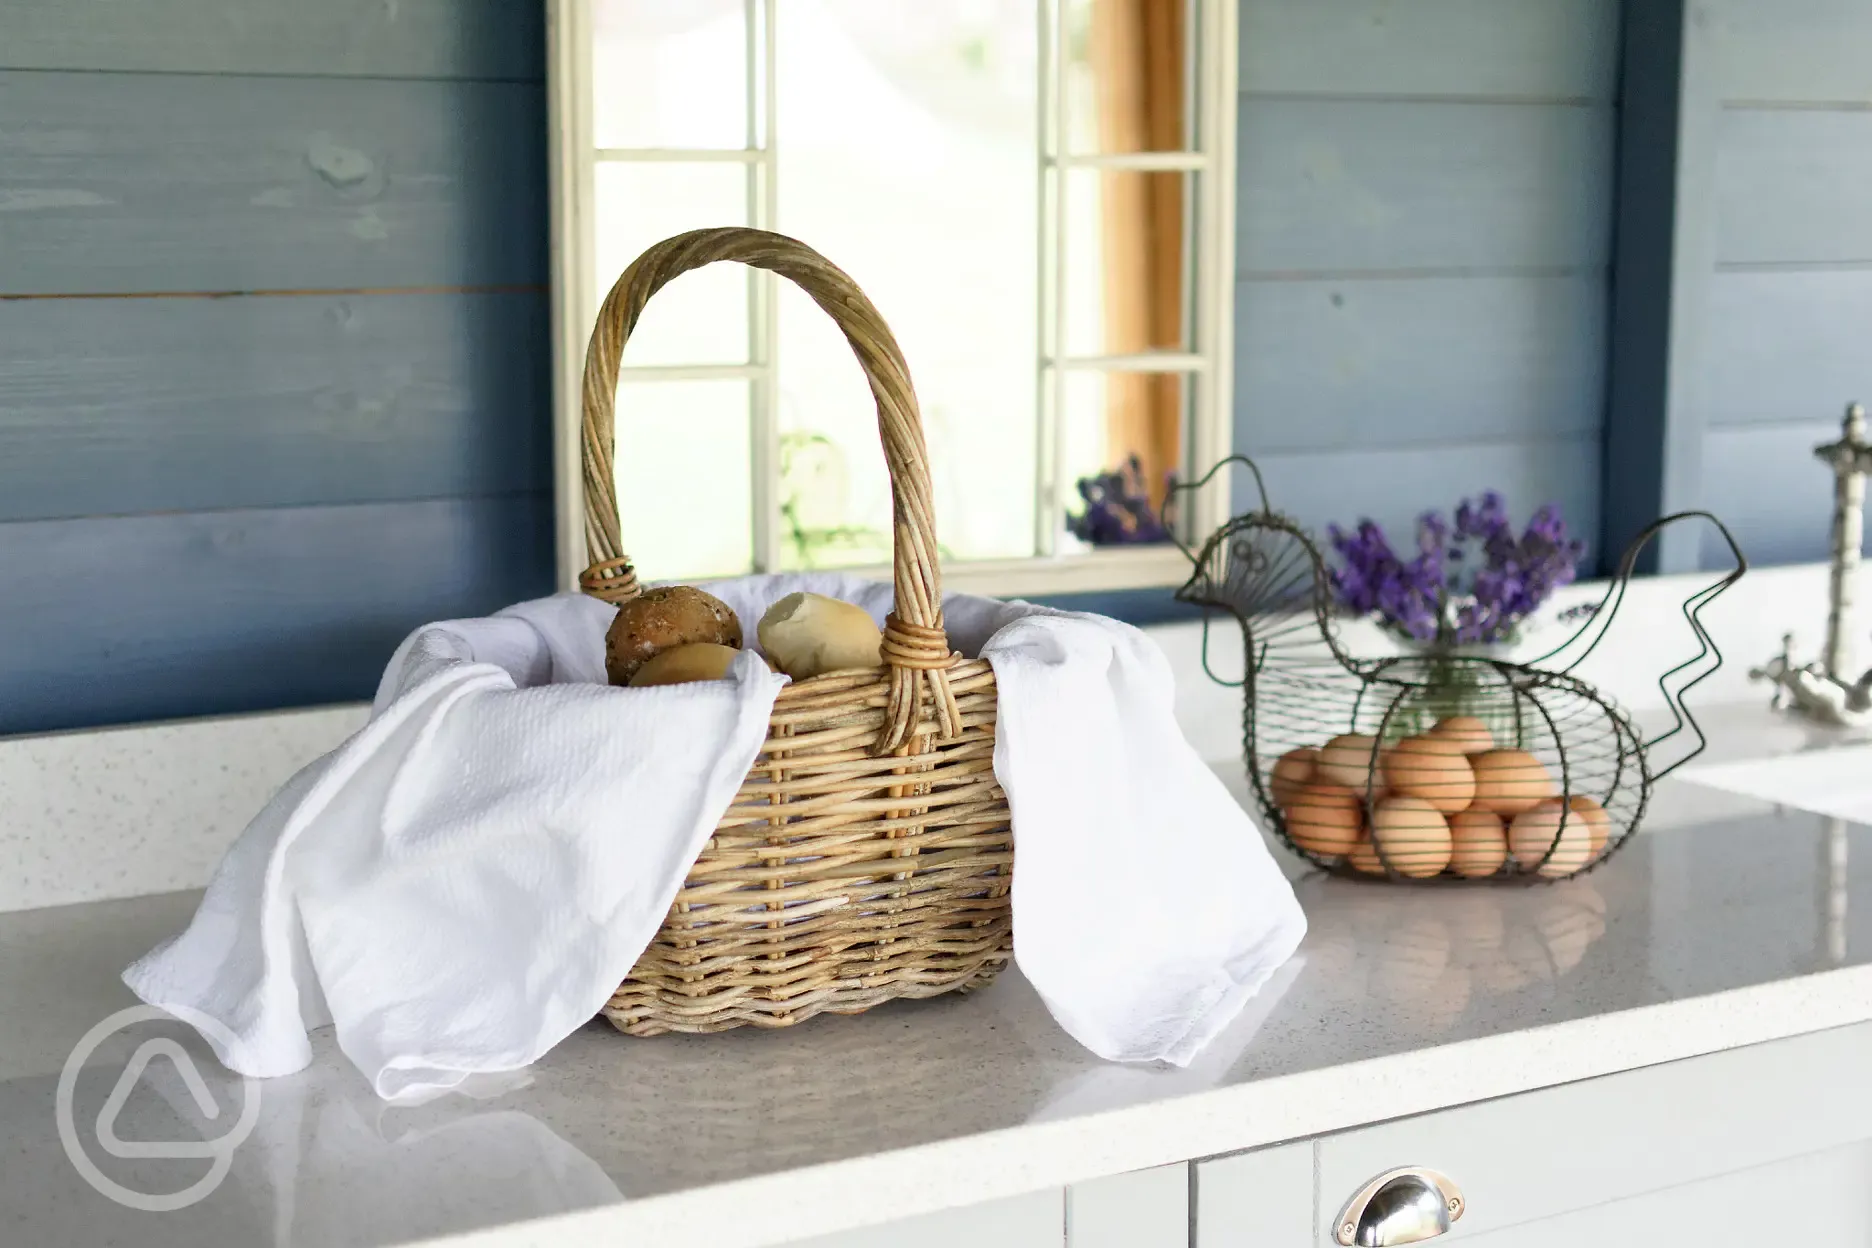 Complimentary breakfast hamper for your first morning